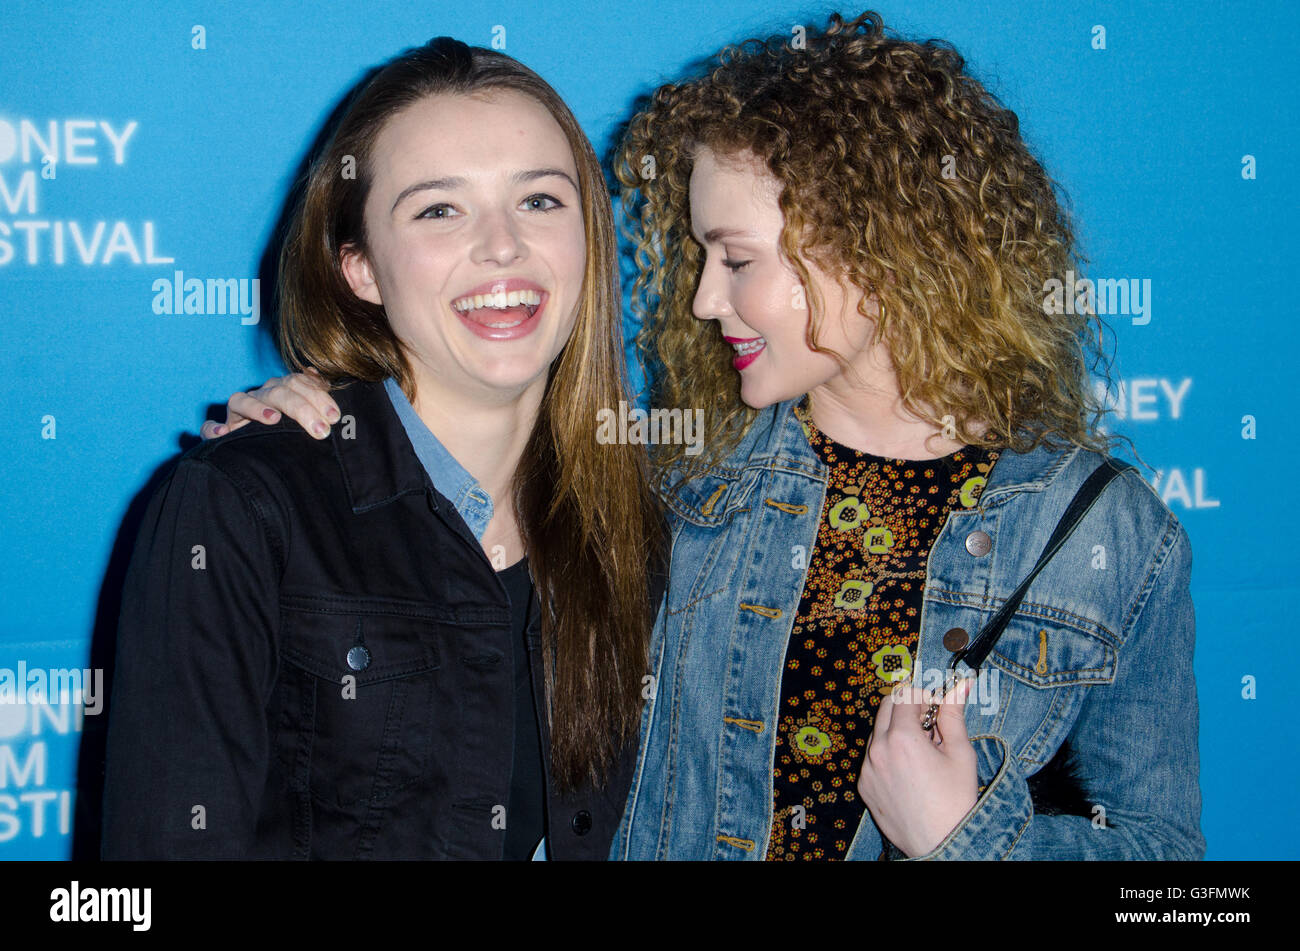 Sydney, Australia. 11th June, 2016. VIP's and celebrities arrive at the Teenage Kicks World Movie Premiere in Sydney. This movie premiere was apart of the Sydney Film Festival which runs from the 8th to the 19th of June at various venues throughout Sydney. Pictured is Philippa Northeast and Gracie Gilbert Credit:  mjmediabox /Alamy Live News Stock Photo